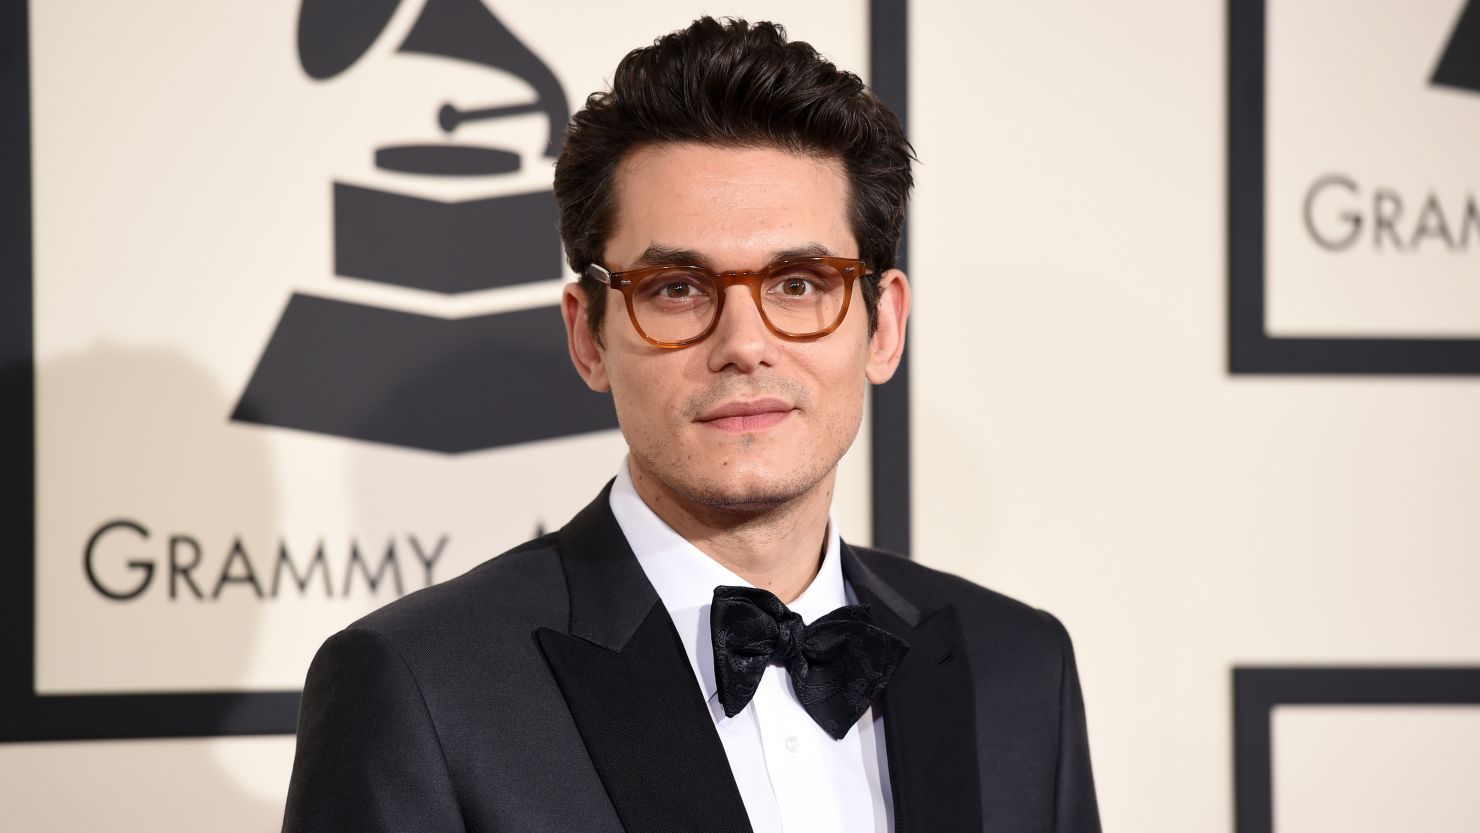 John Mayer is a part of "Bachelor Nation."